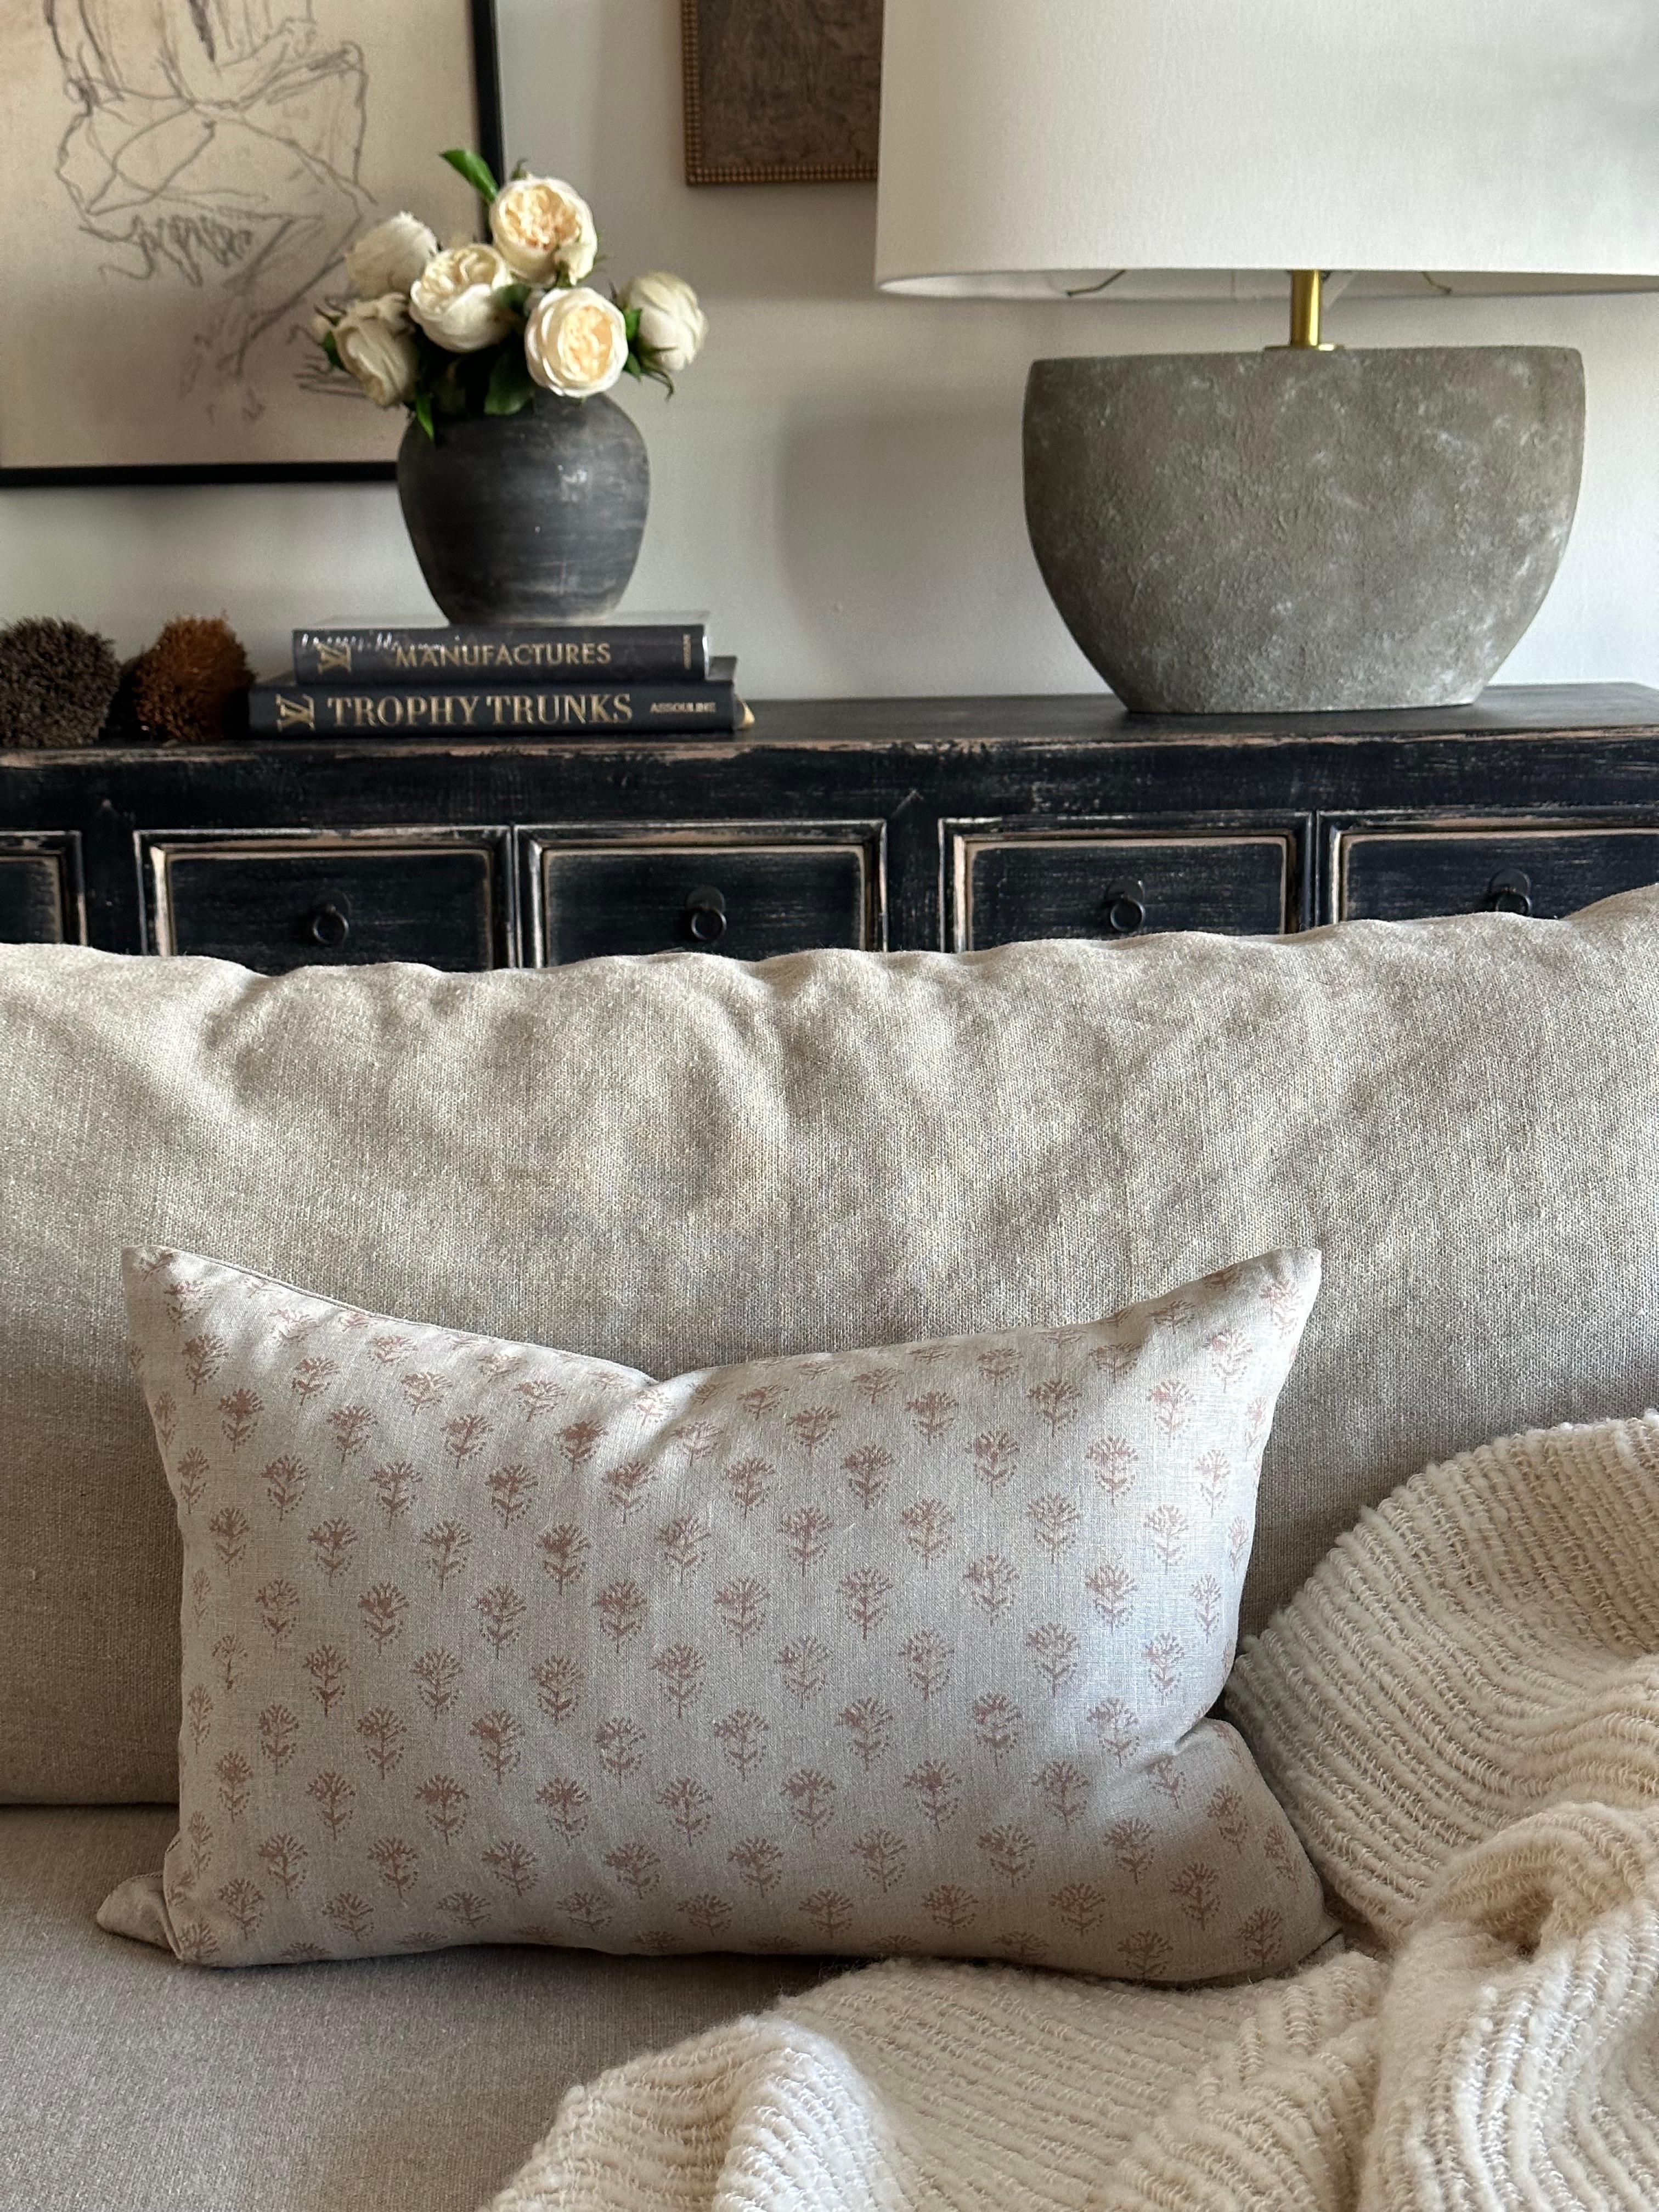 Our latest collection of beautiful hand blocked and linen pillows can be arranged to create beauty and bring a pop of color to your room while adding softness! This item is made to order and can vary in lead times.
Includes a feather down insert.
On